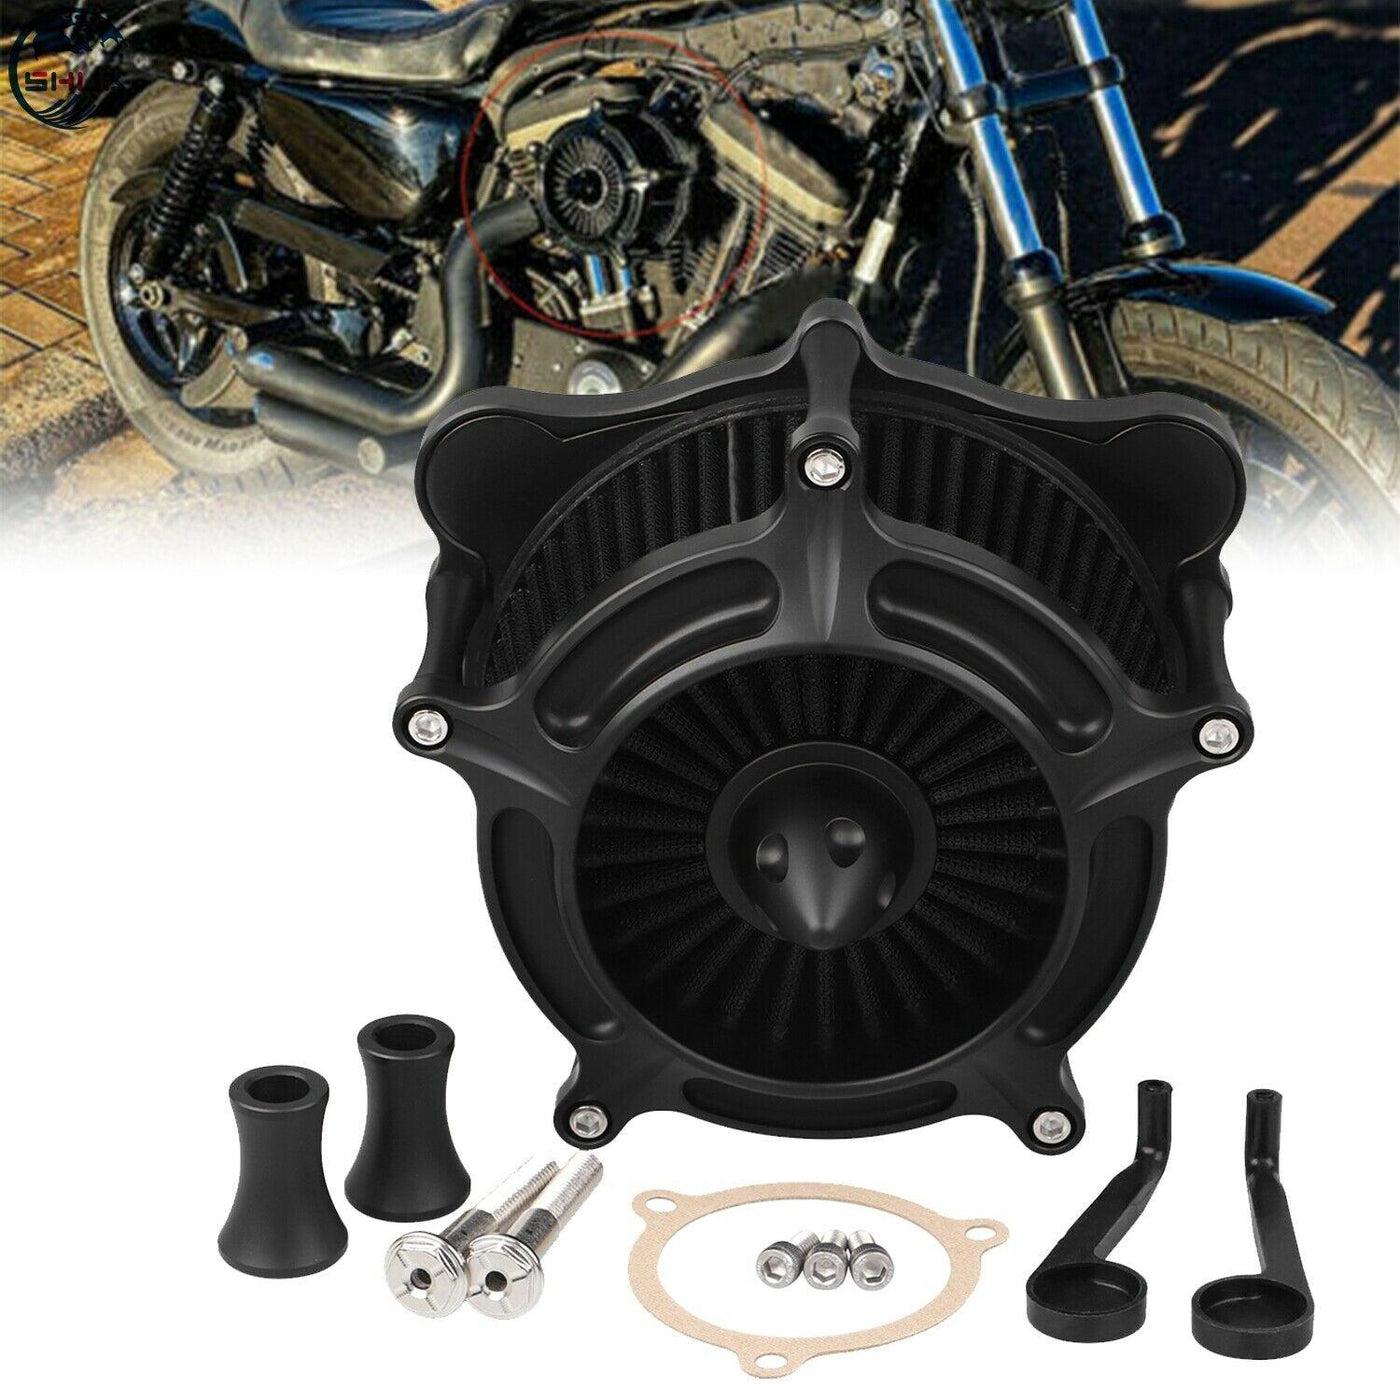 Air Cleaner Intake Filter Kit For Harley Street Electra Road King Glide 08-2016 - Moto Life Products